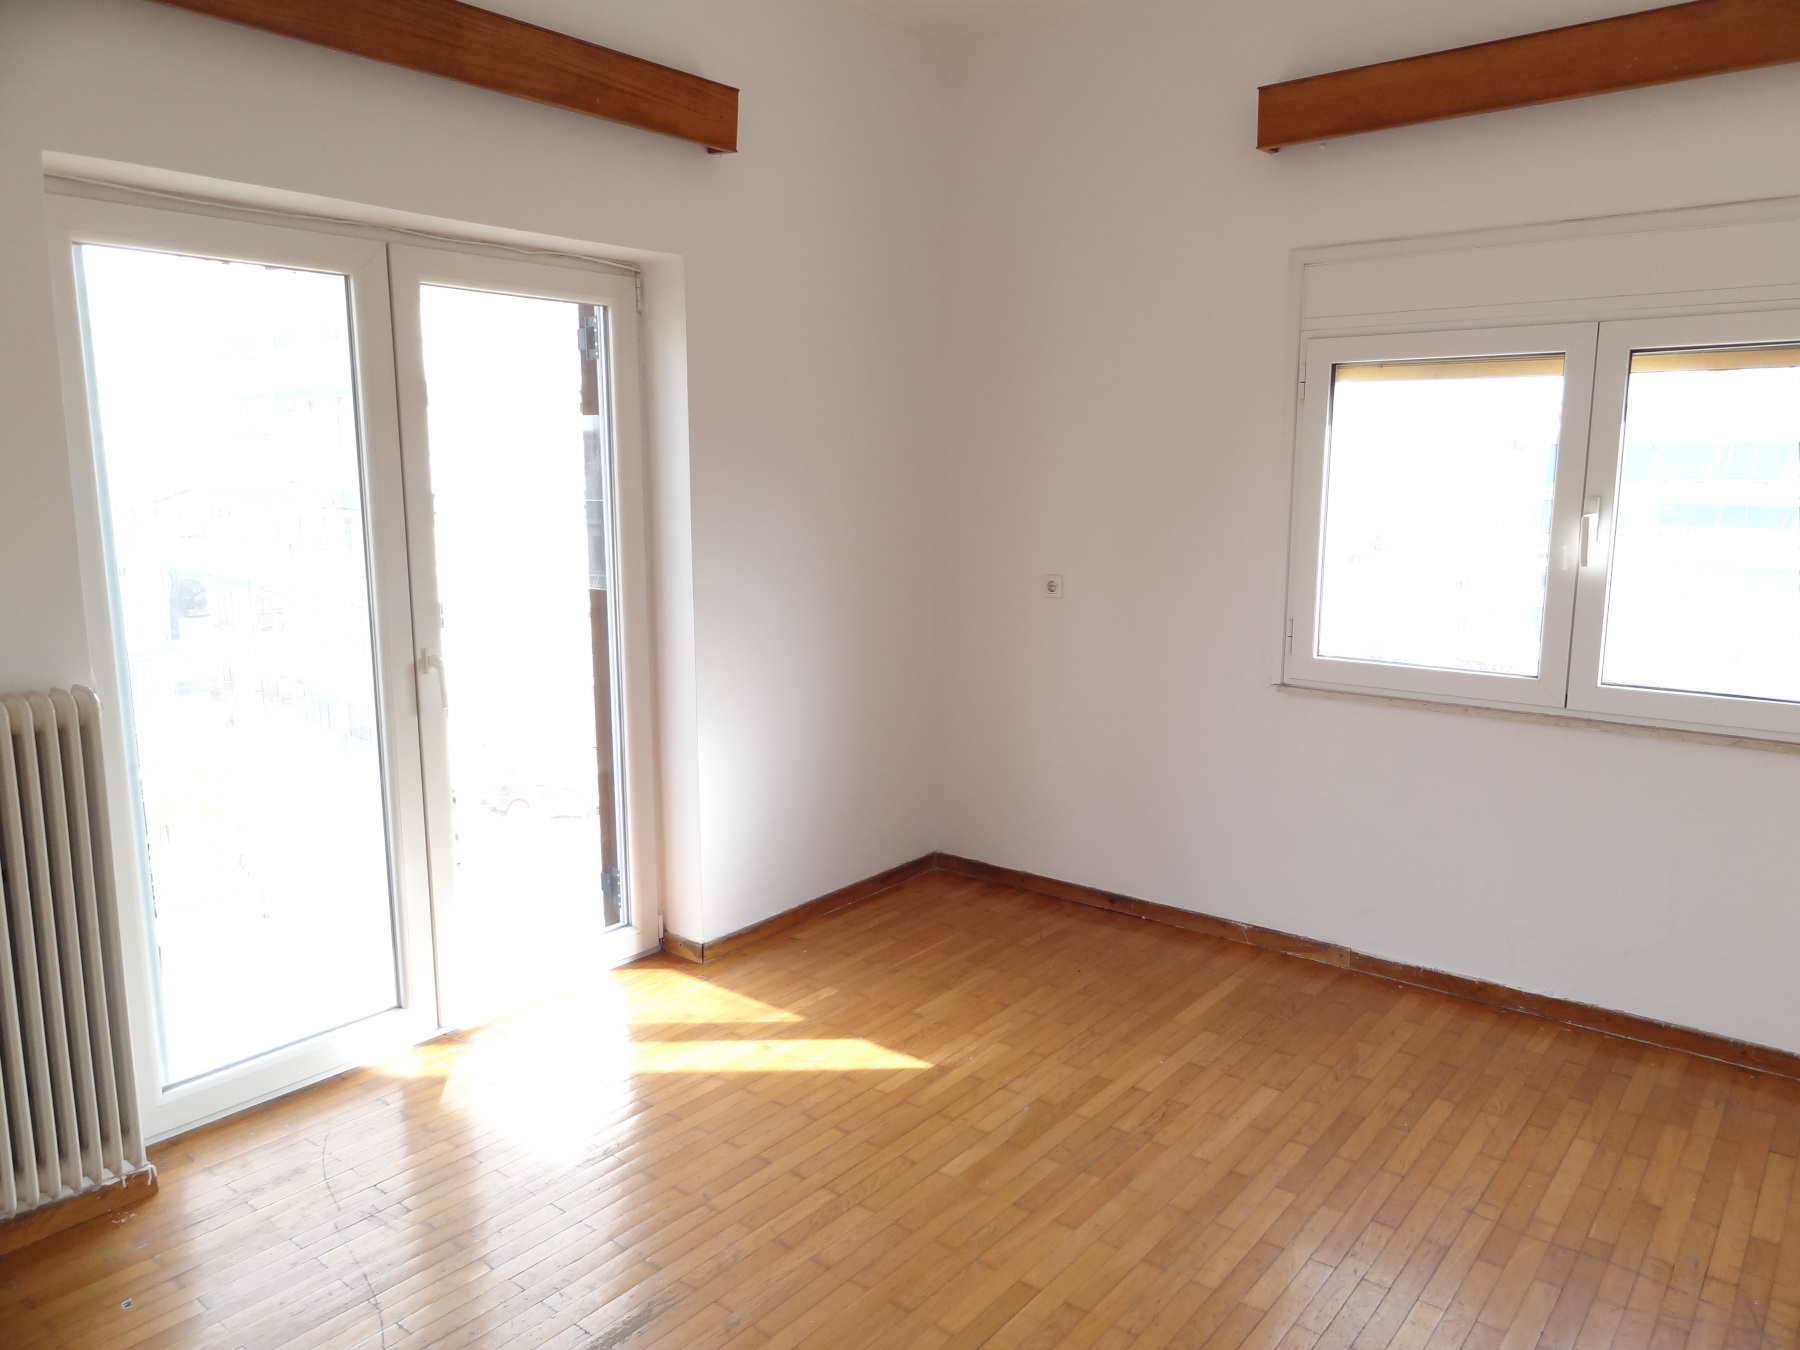 For rent, a spacious 1 bedroom apartment of 56 sq.m. 2nd floor near Dodoni Avenue in Domboli in Ioannina